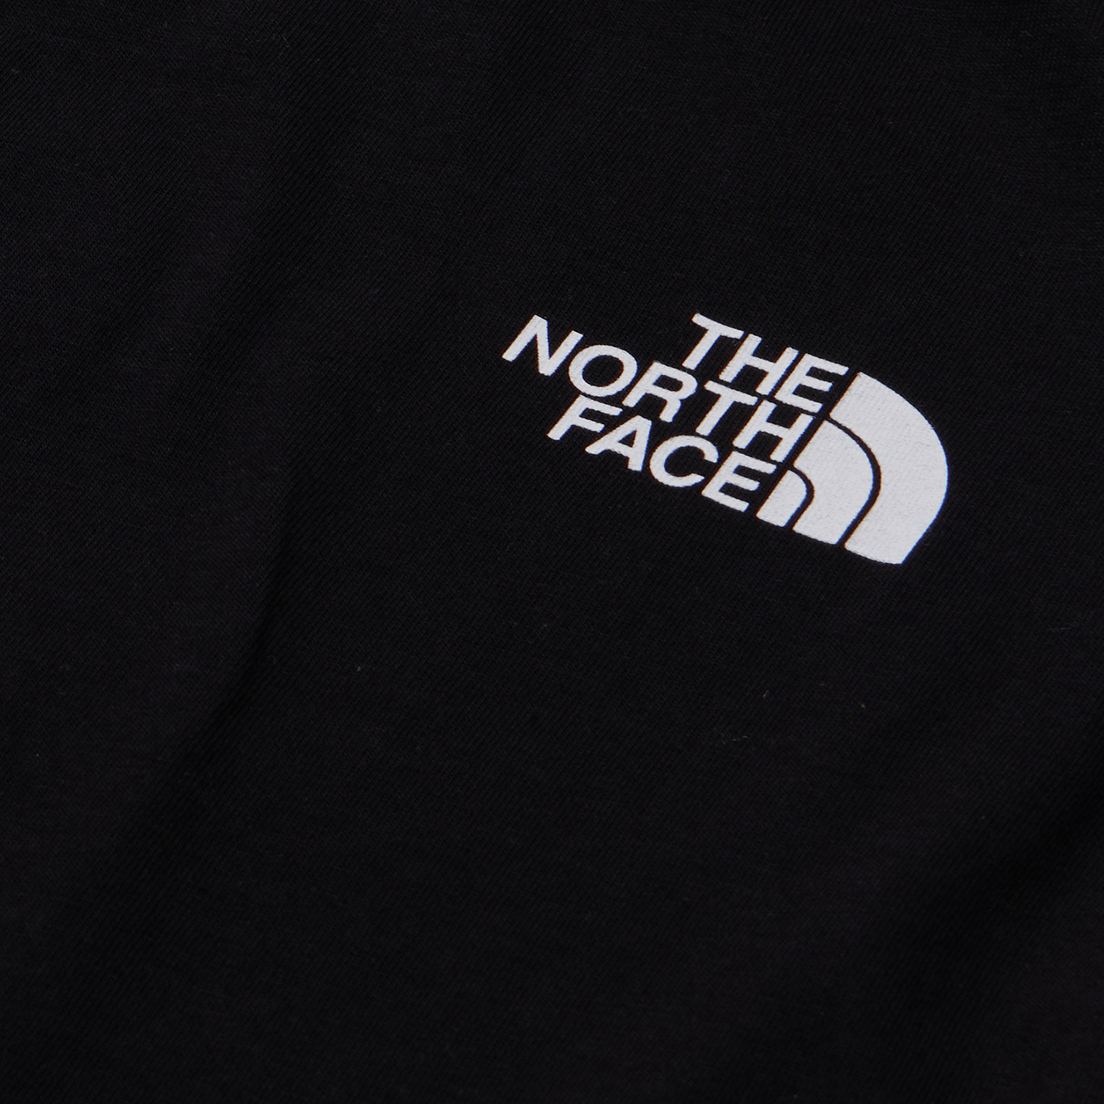 The North Face Женская футболка Cropped Simple Dome